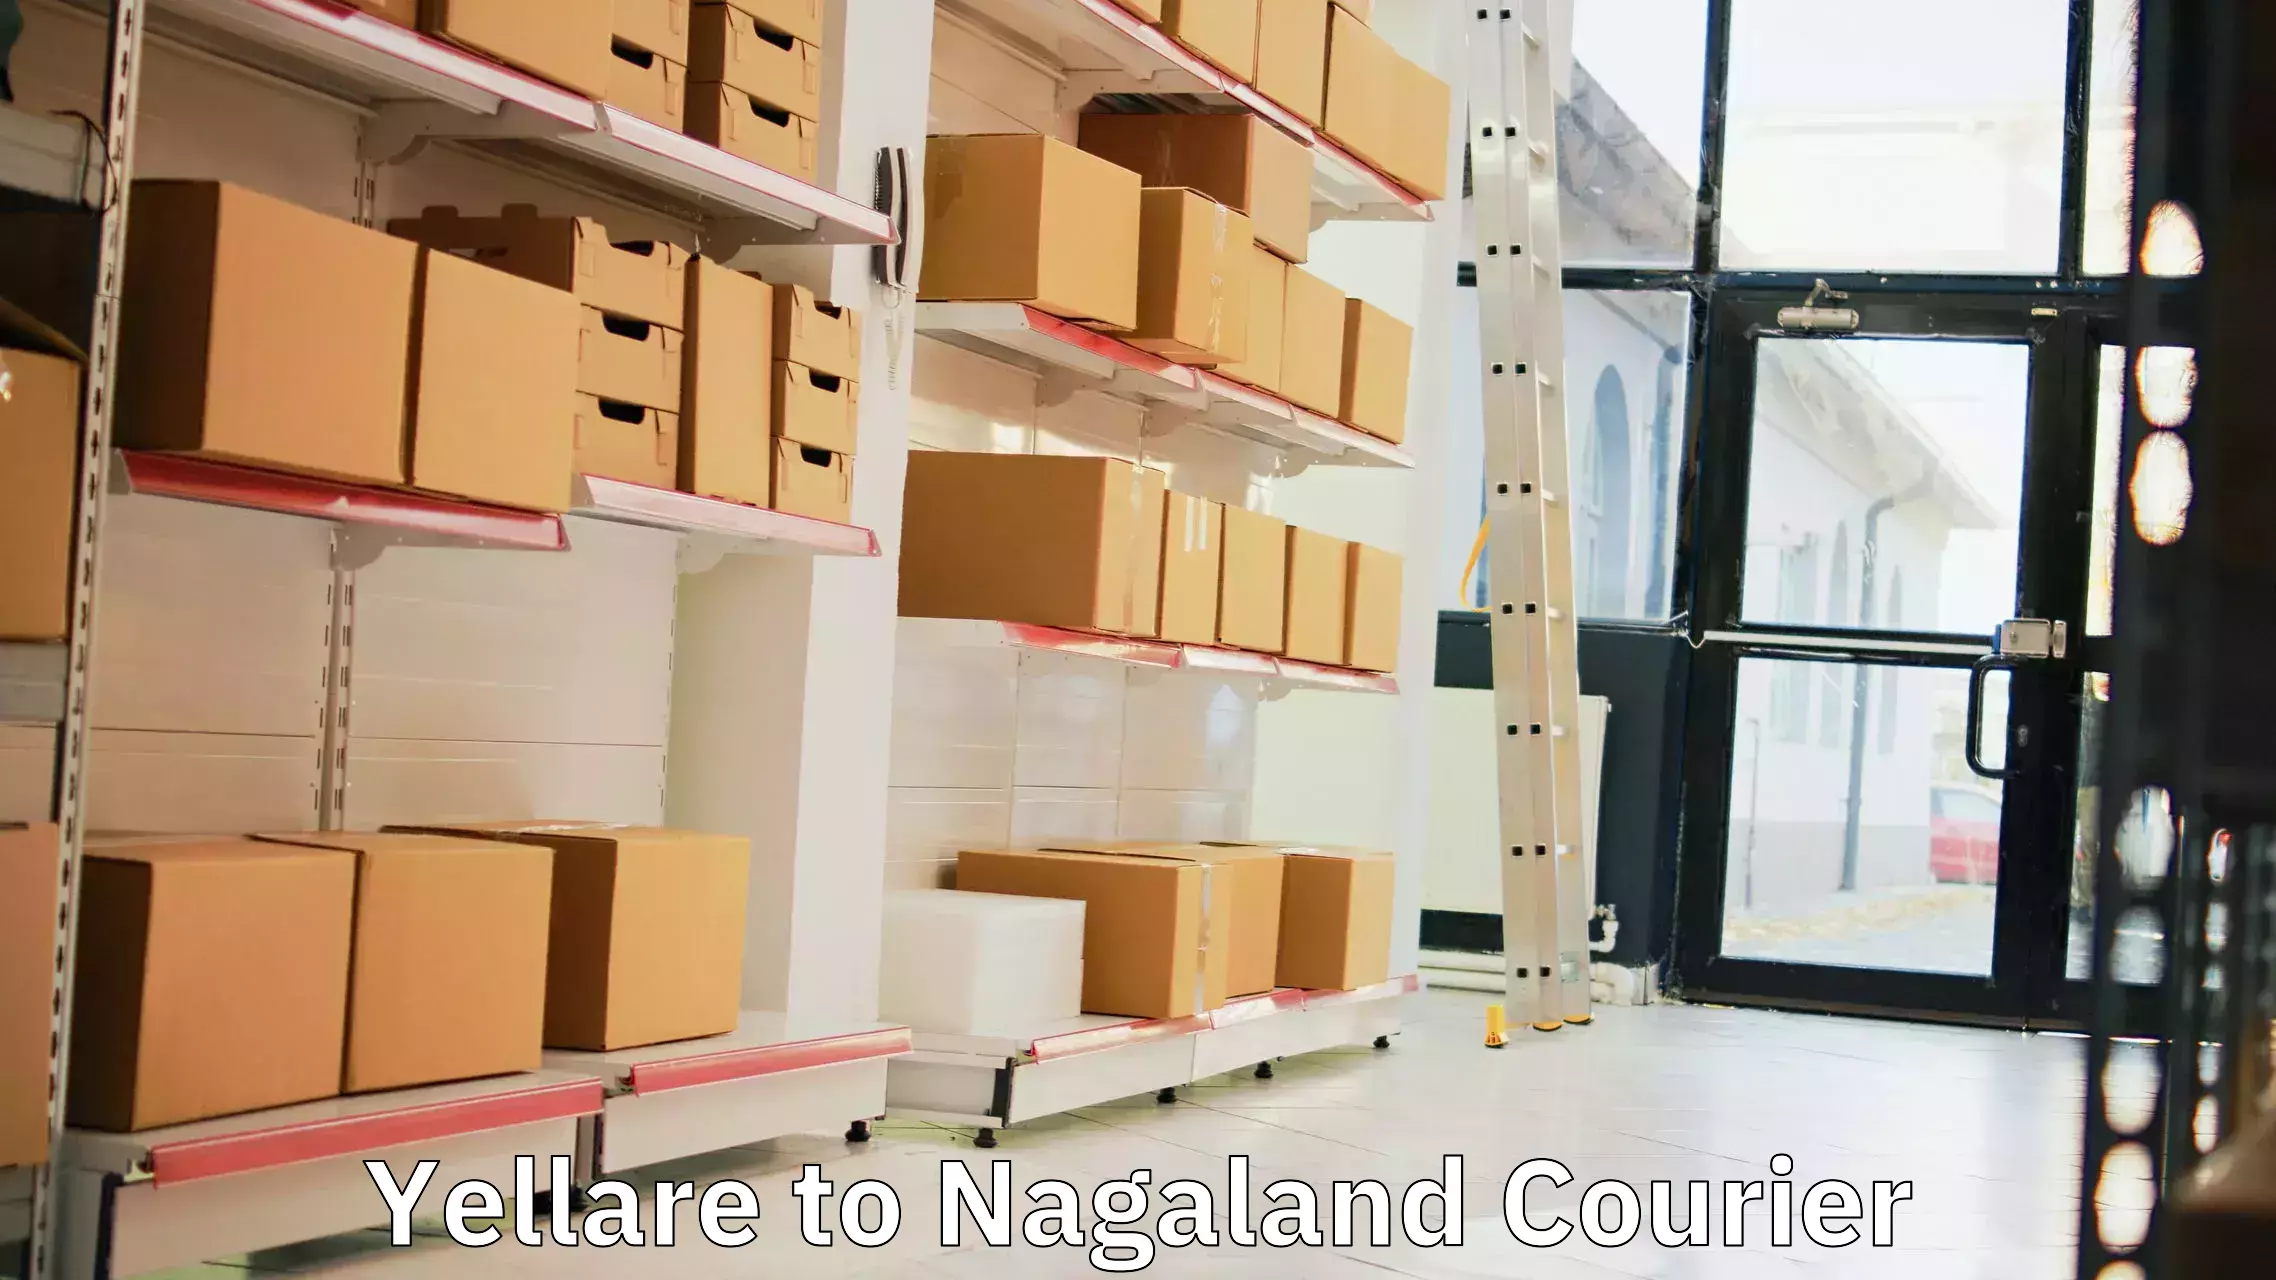 Customer-friendly courier services Yellare to Nagaland